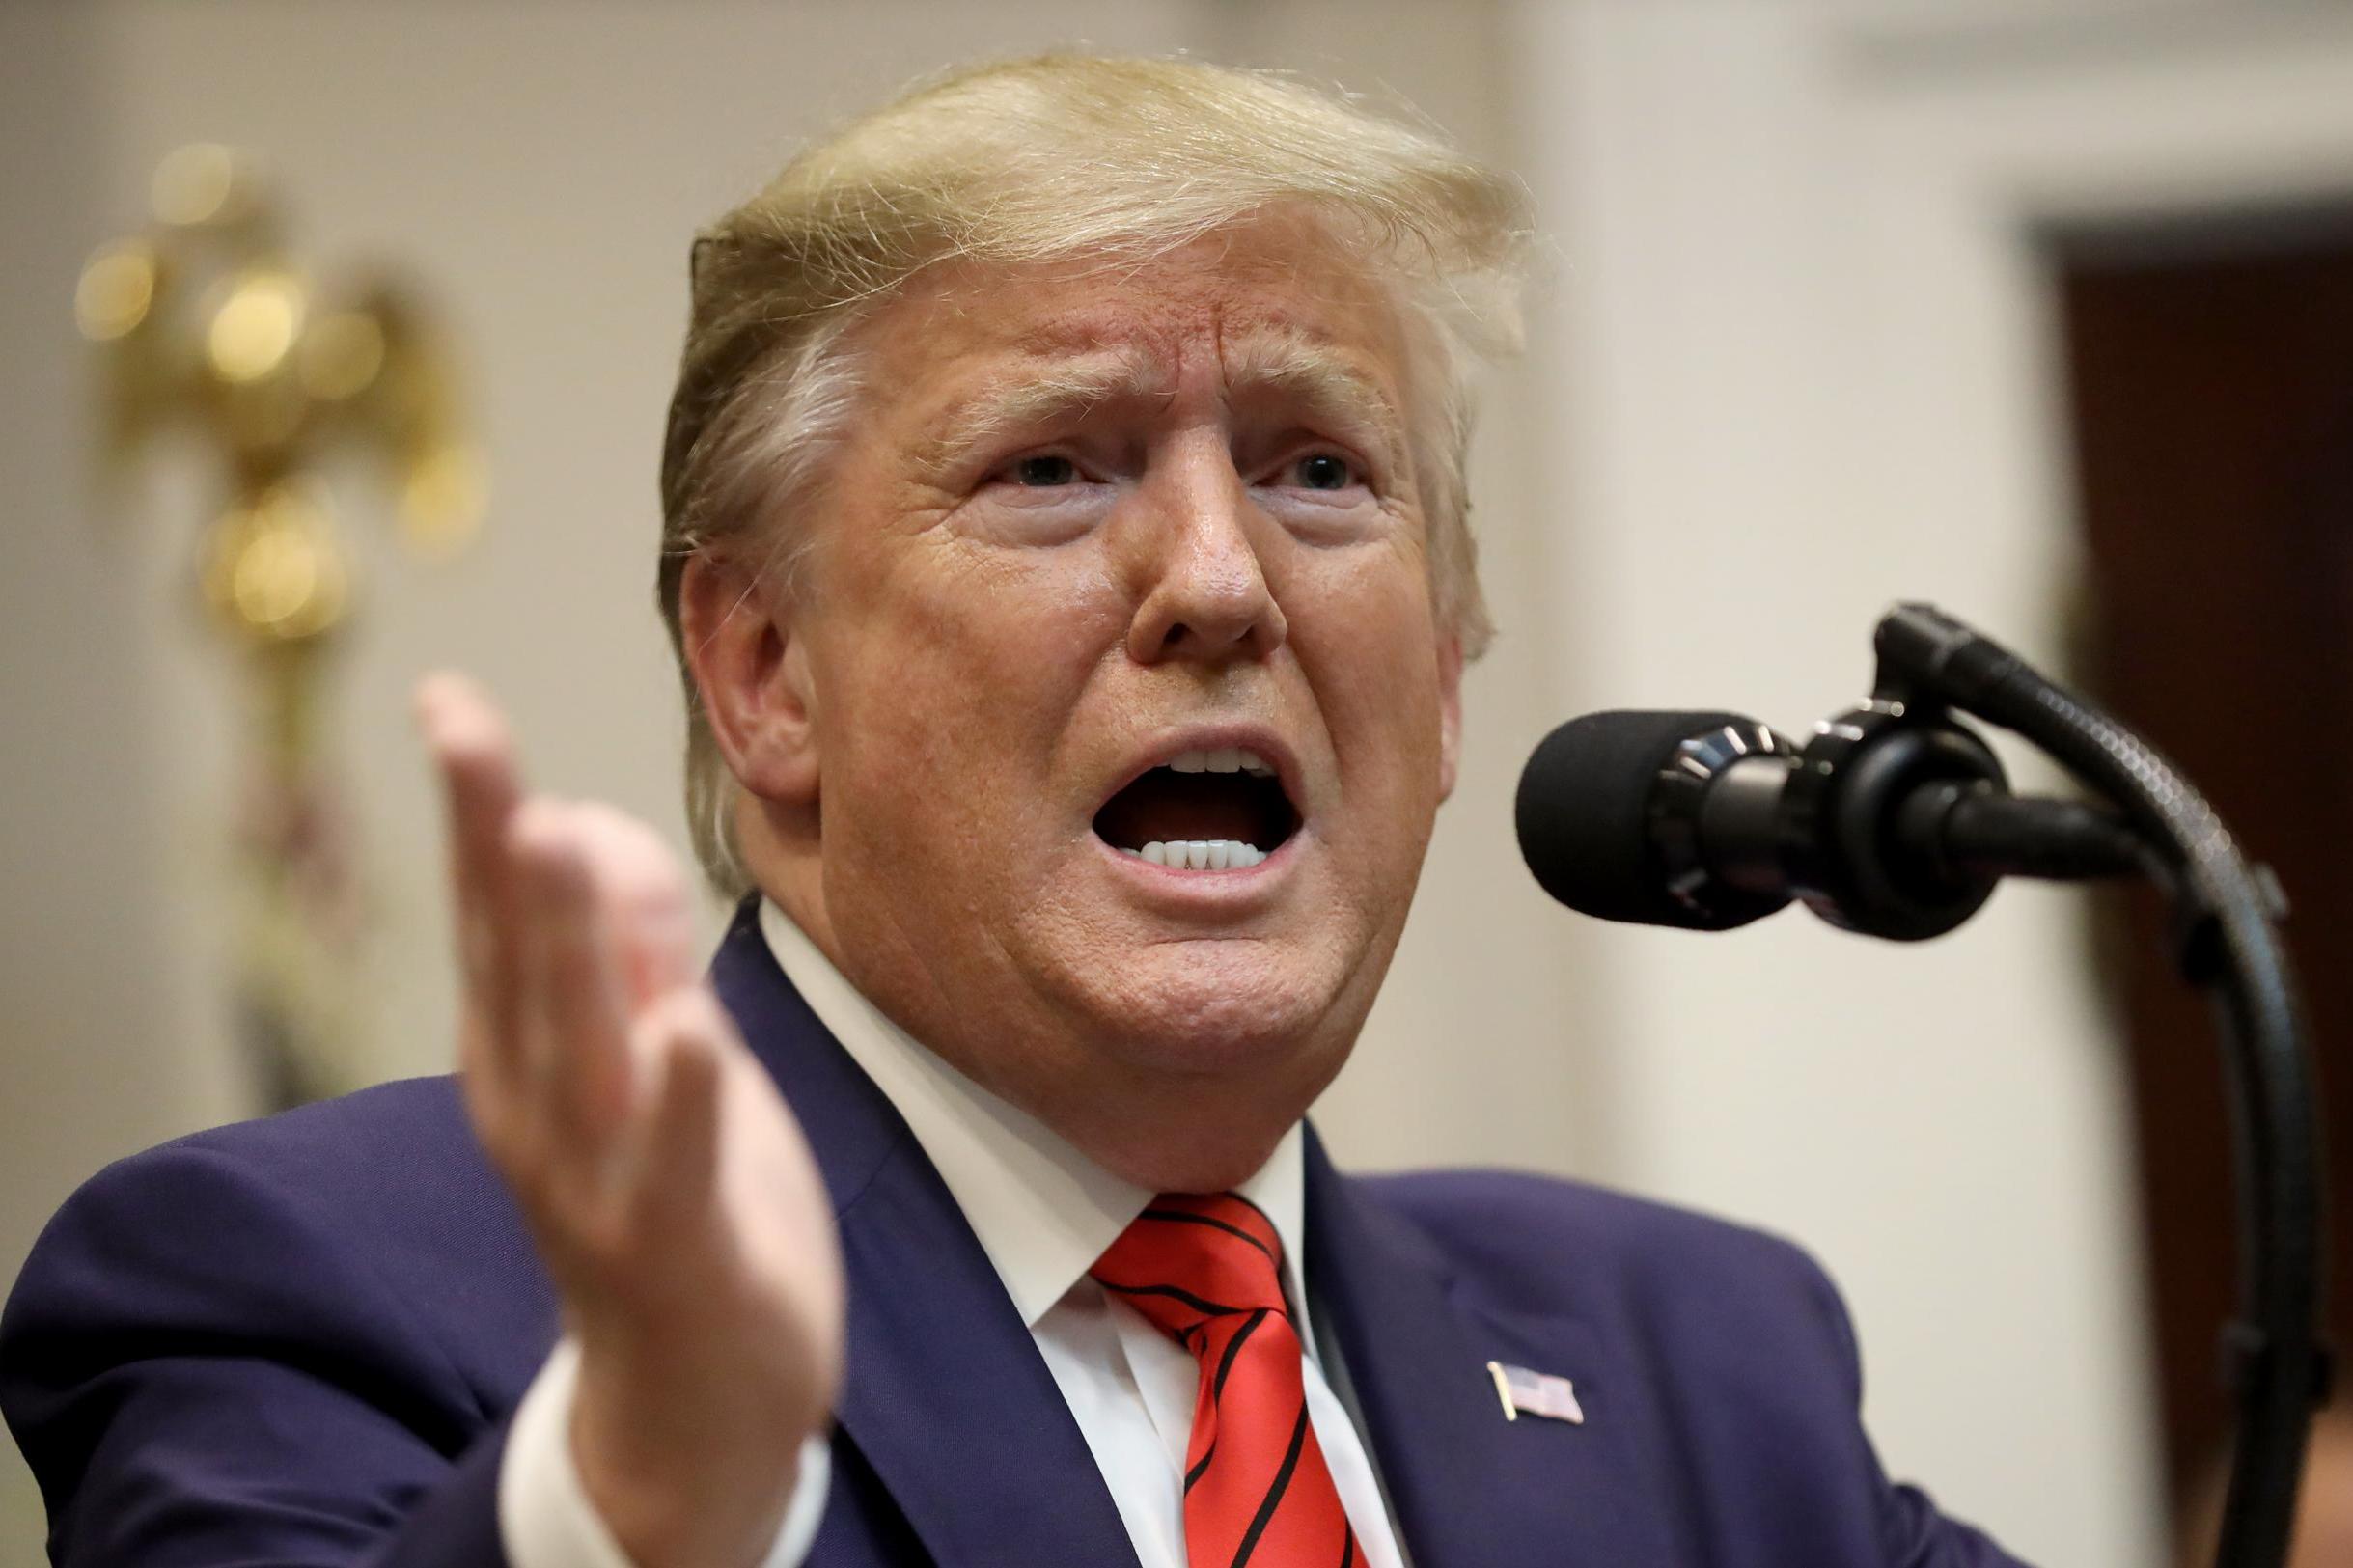 Donald Trump responds to a question from a reporter at an event for the signing of two executive orders at the White House on 9 October, 2019 in Washington, DC.